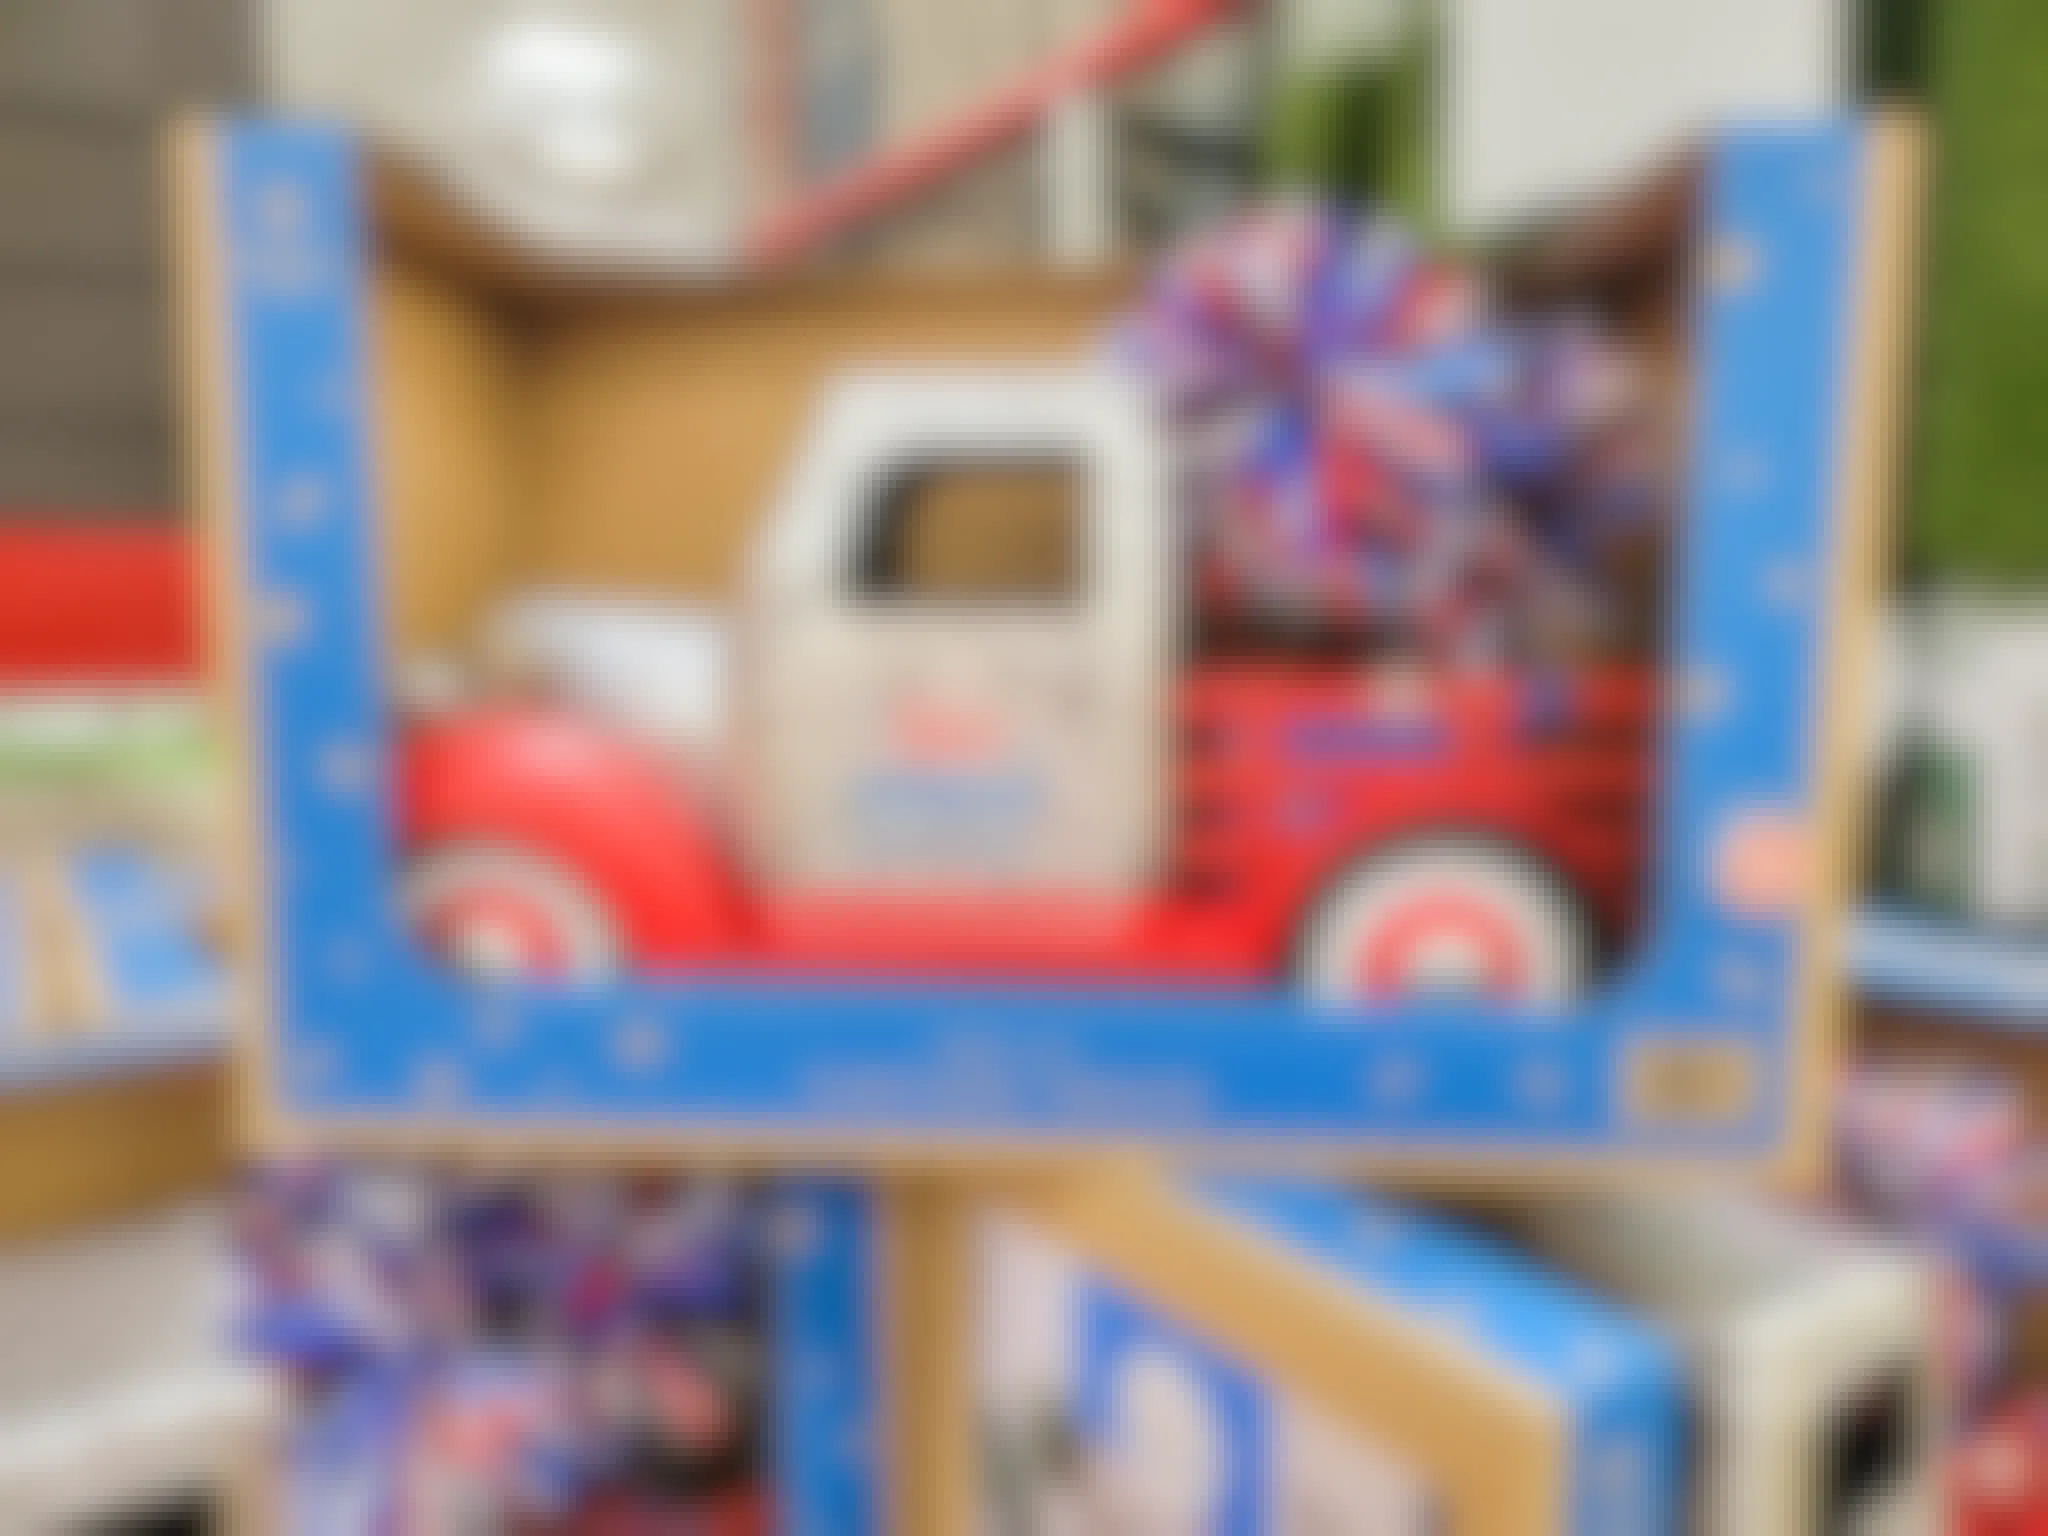 decorative pre-lit 4th of july truck